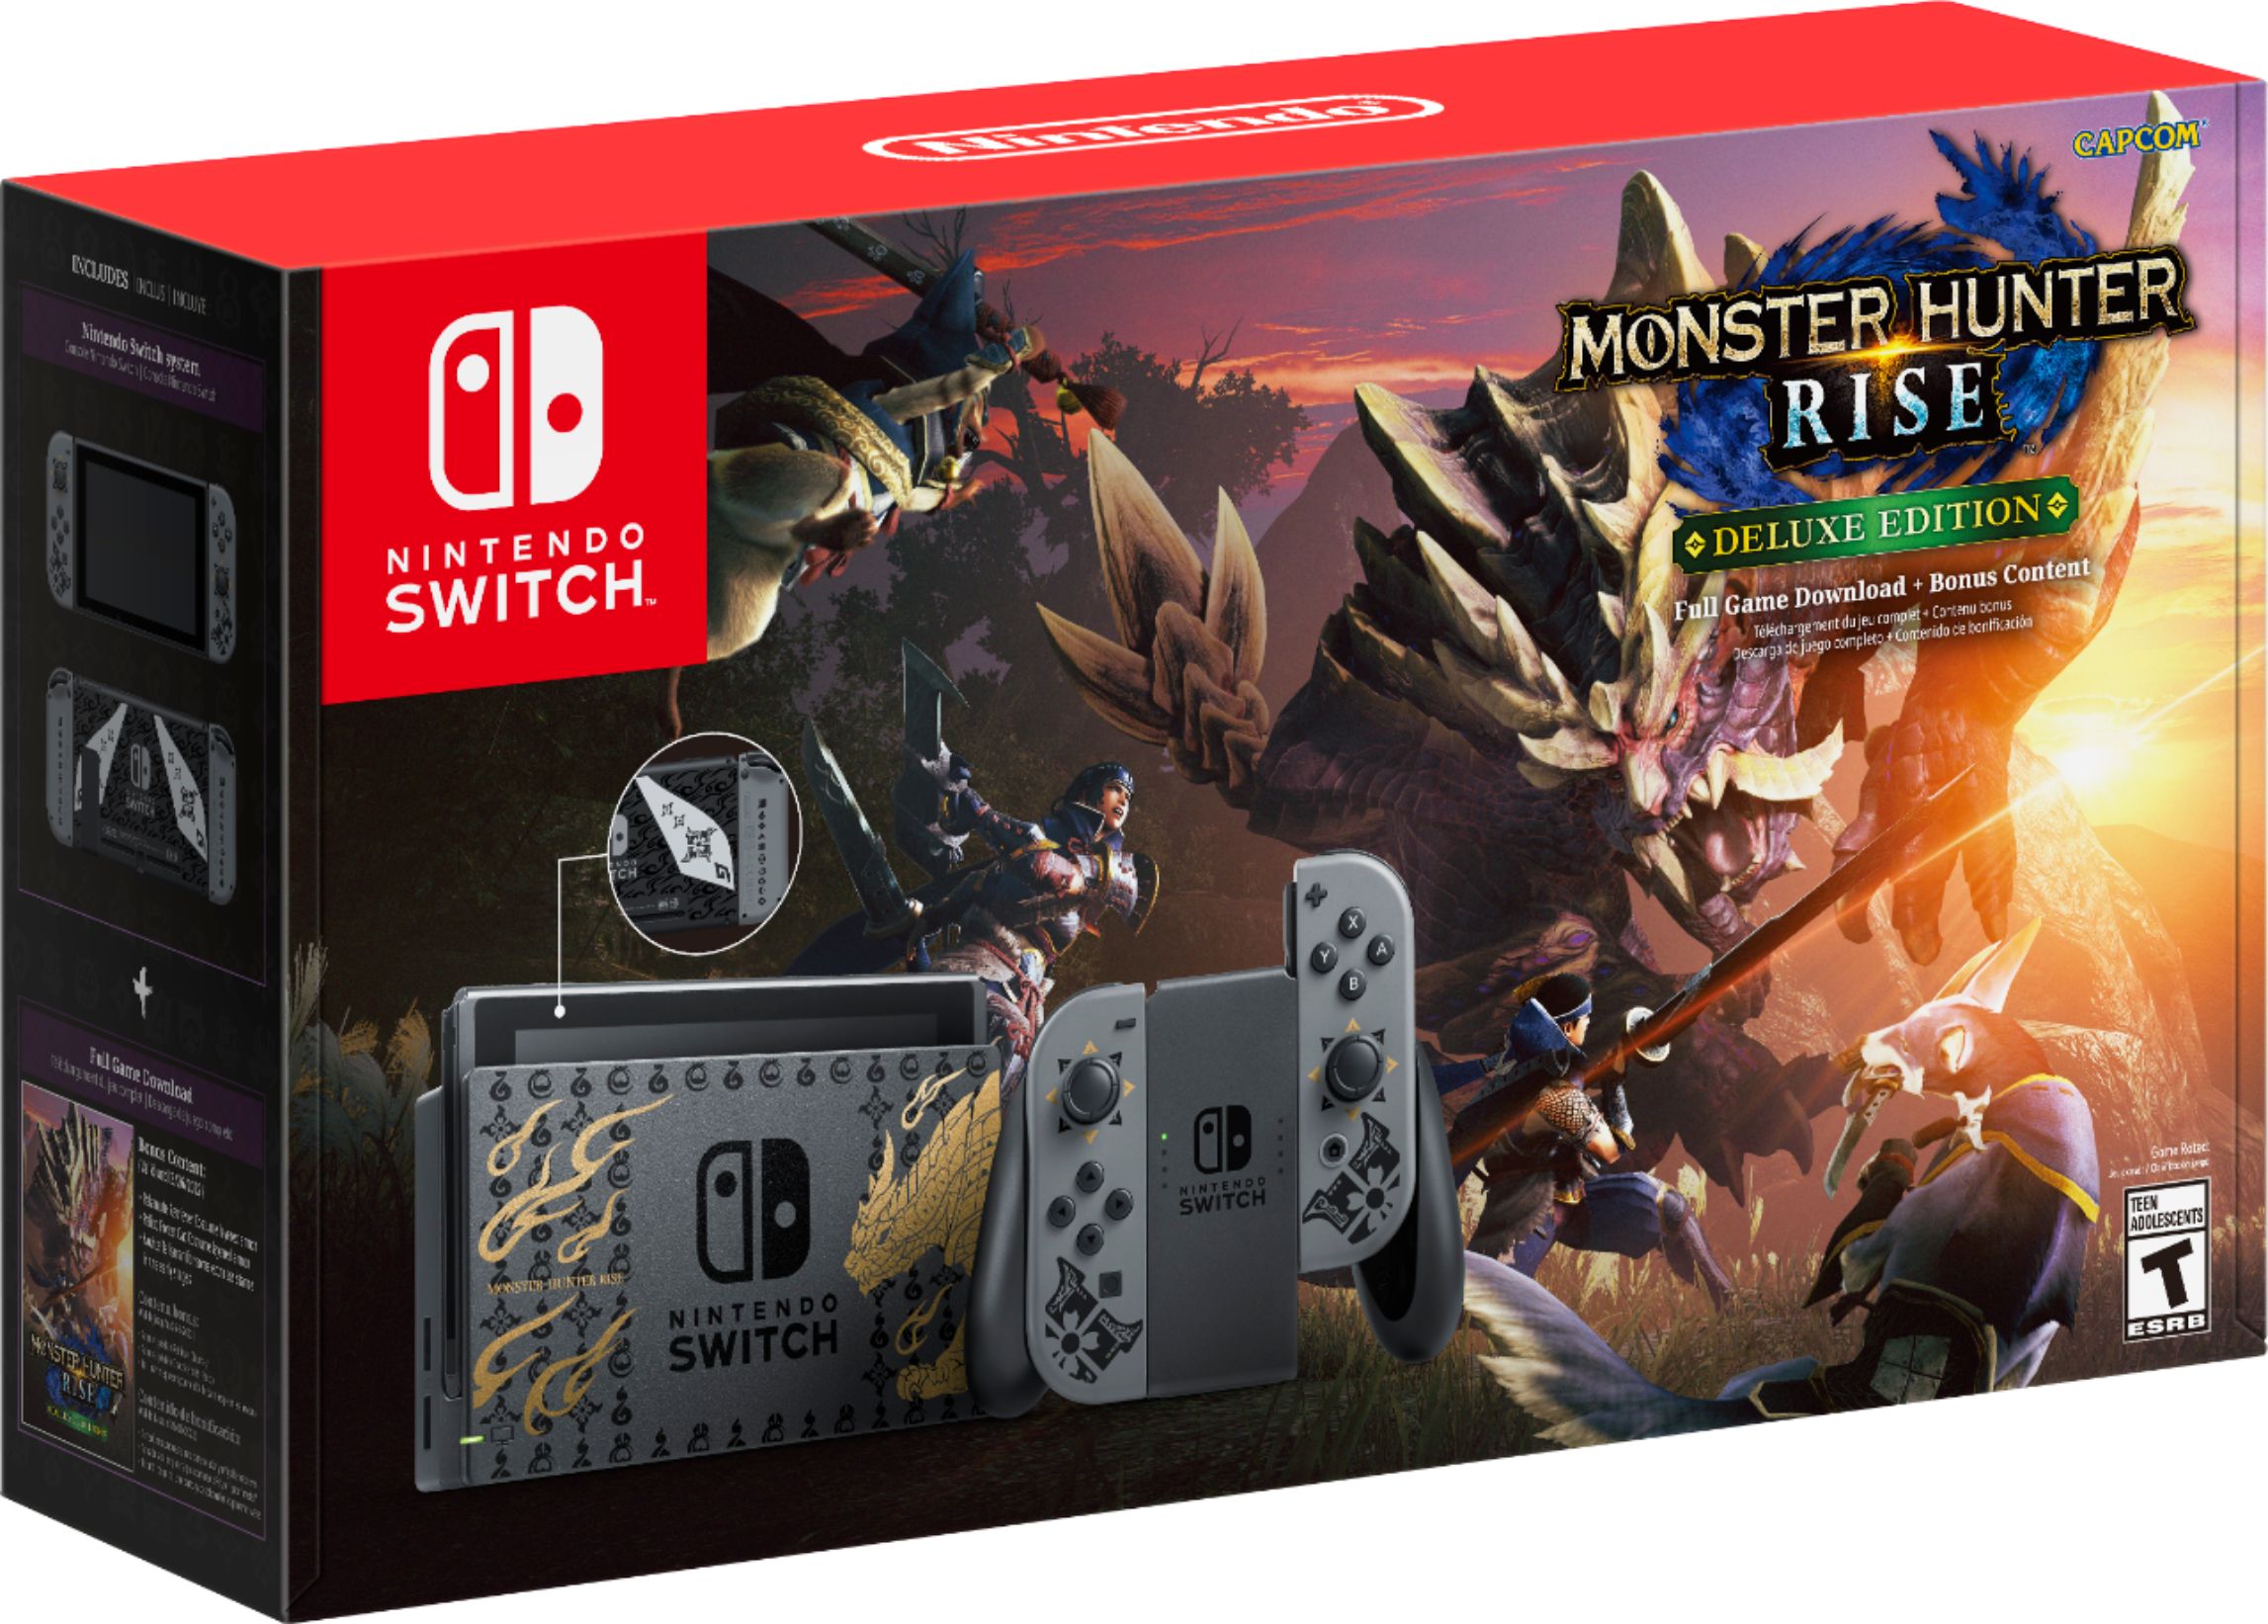 Nintendo Switch MONSTER HUNTER RISE Deluxe Edition system ...